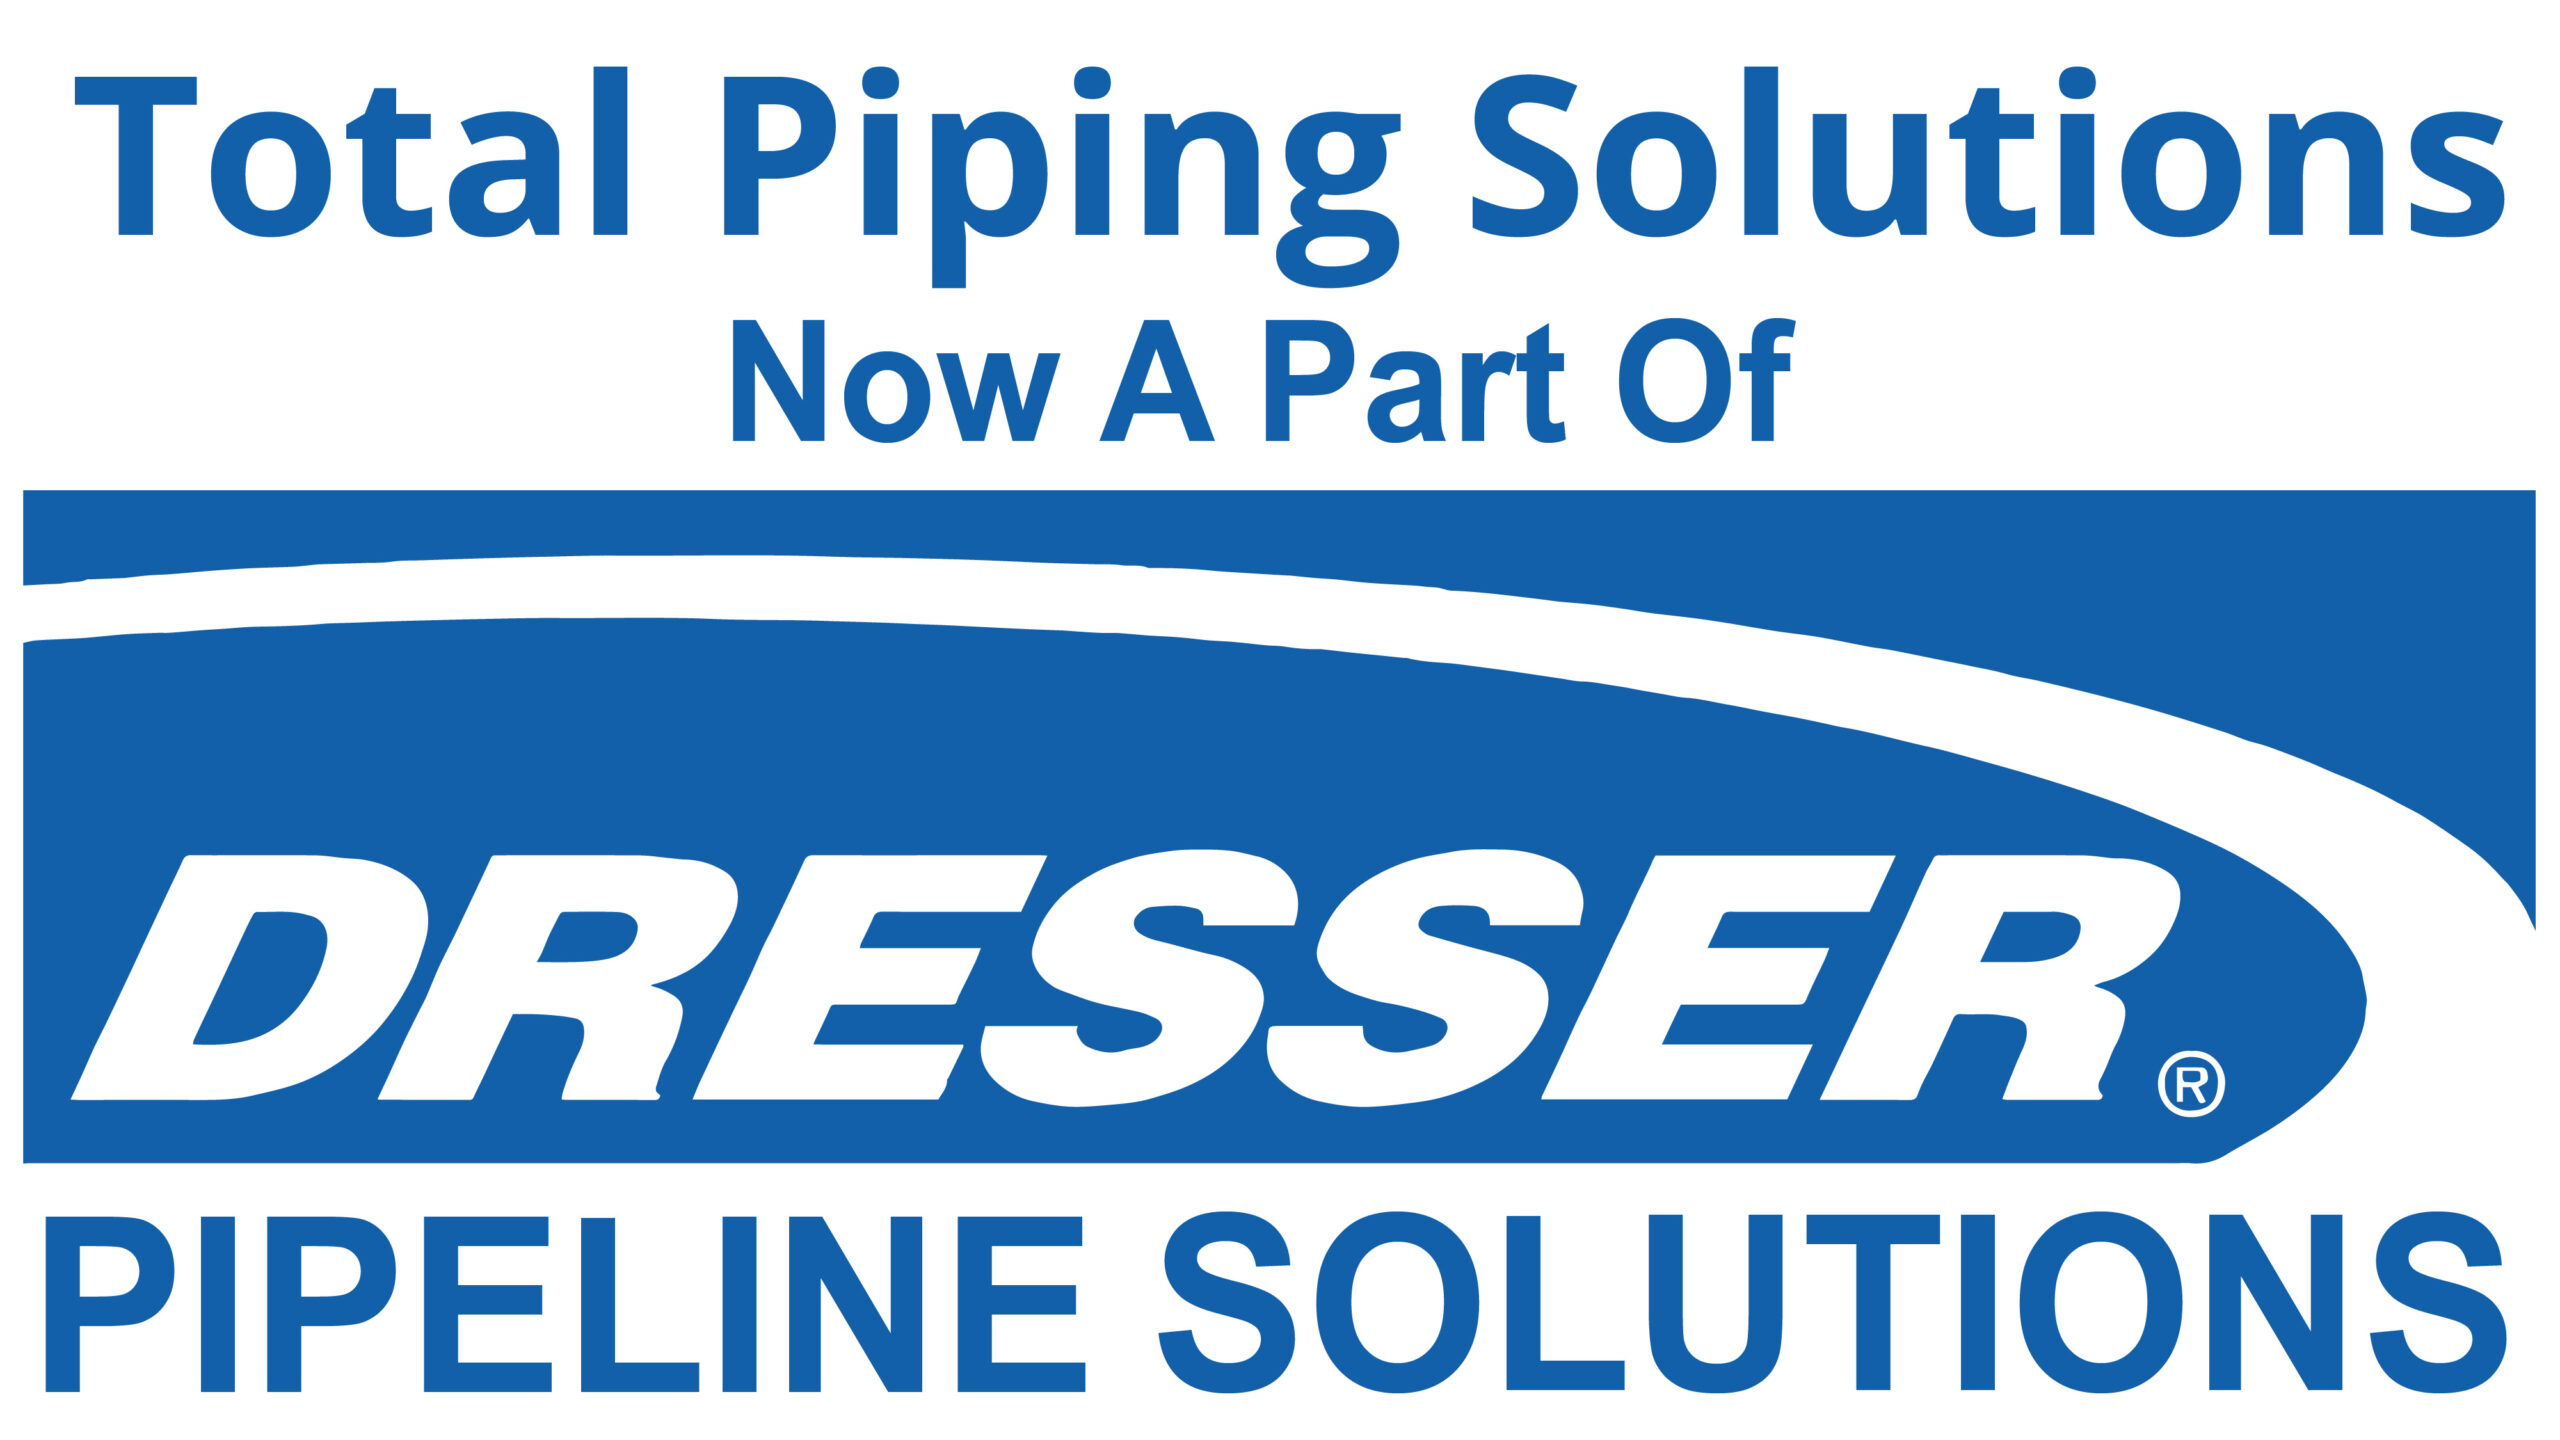 Total Piping Solutions and Dresser Pipeline Solutions